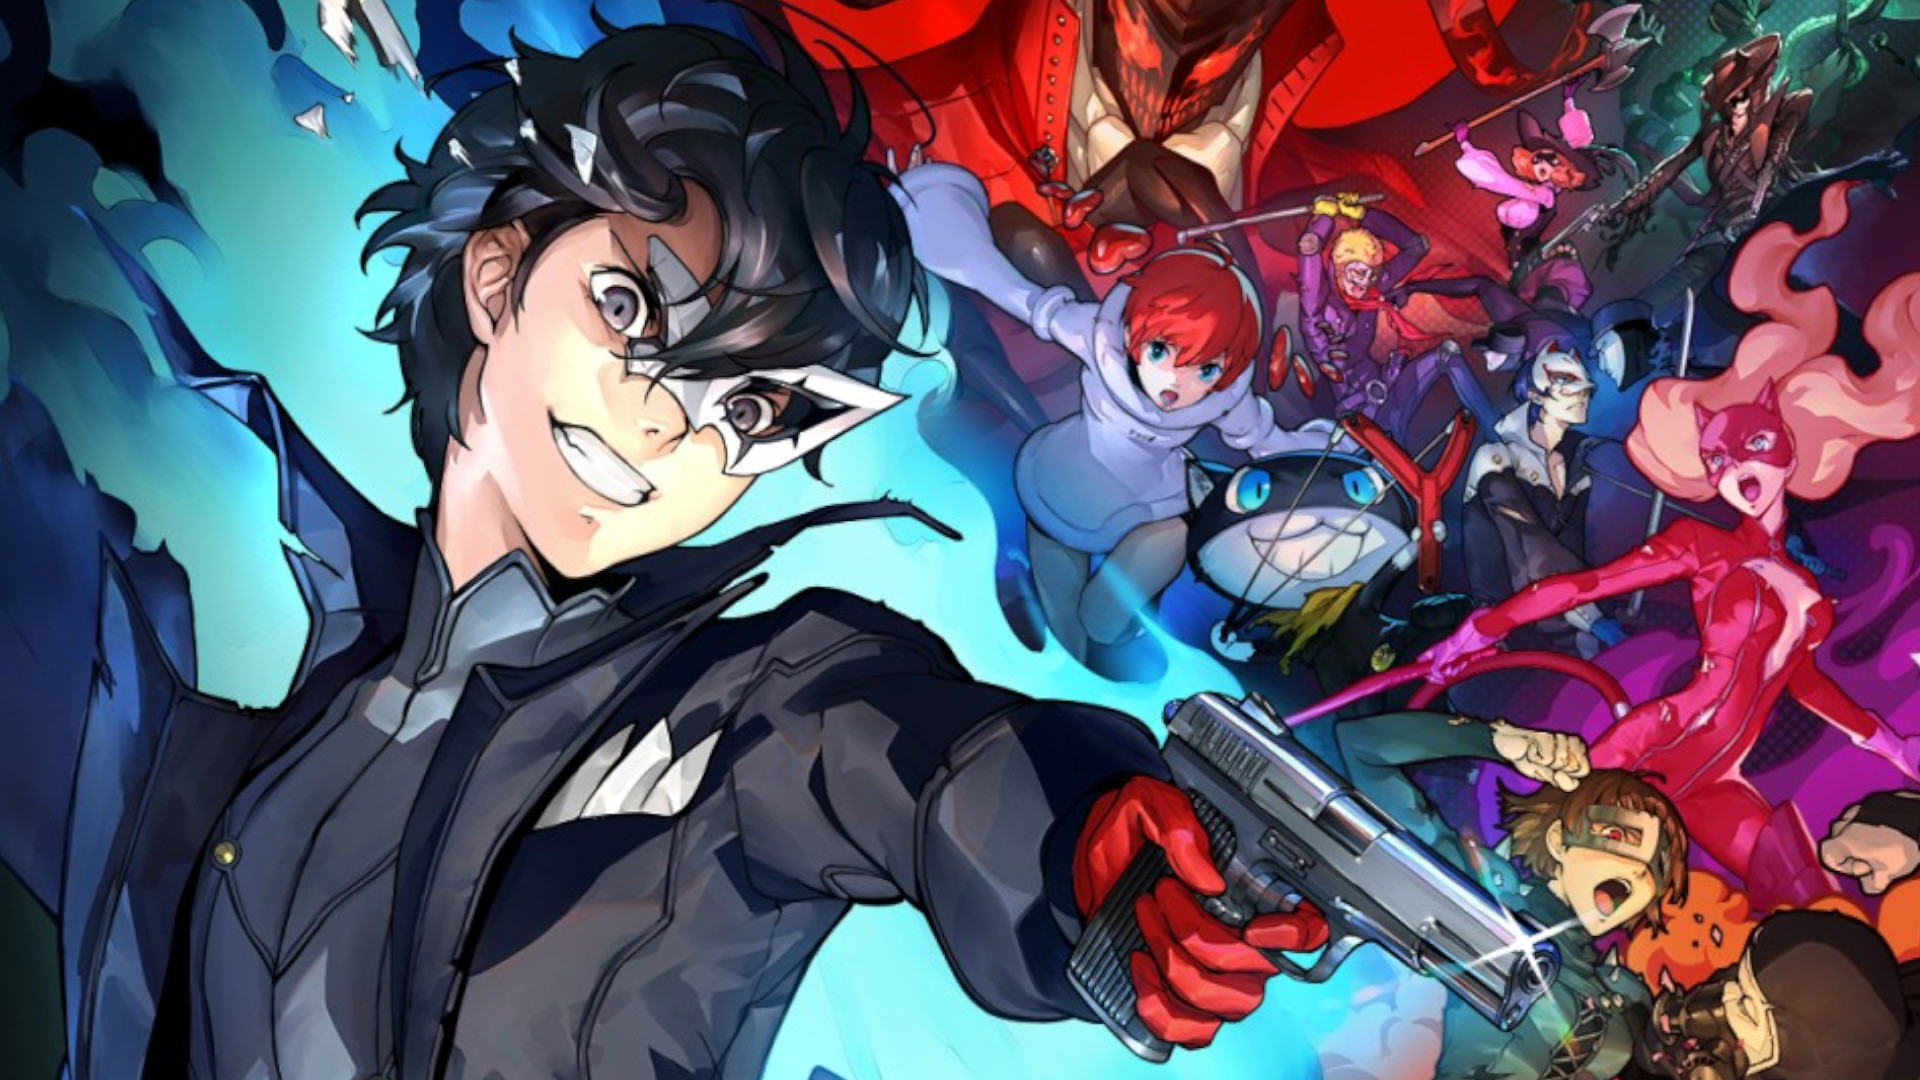 At this price, I'll give the Persona 5 spinoff a chance | TechRadar